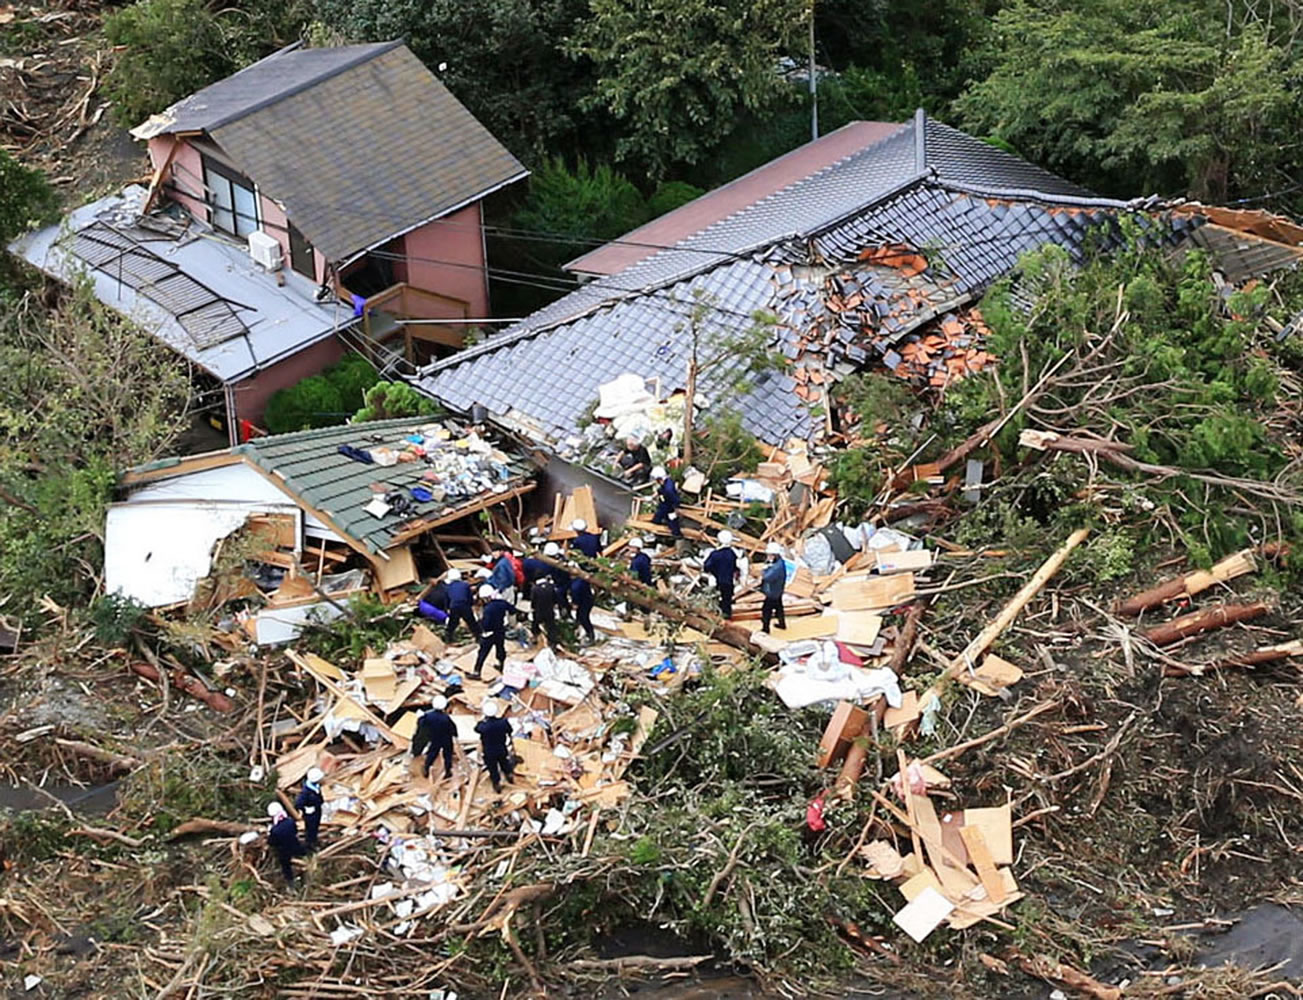 Rescue workers look for survivors as they stand on the rubble of a house buried by mudslides after a powerful typhoon hit Oshima on Izu Oshima island, about 120 kilometers (75 miles) south of Tokyo on Wednesday morning.